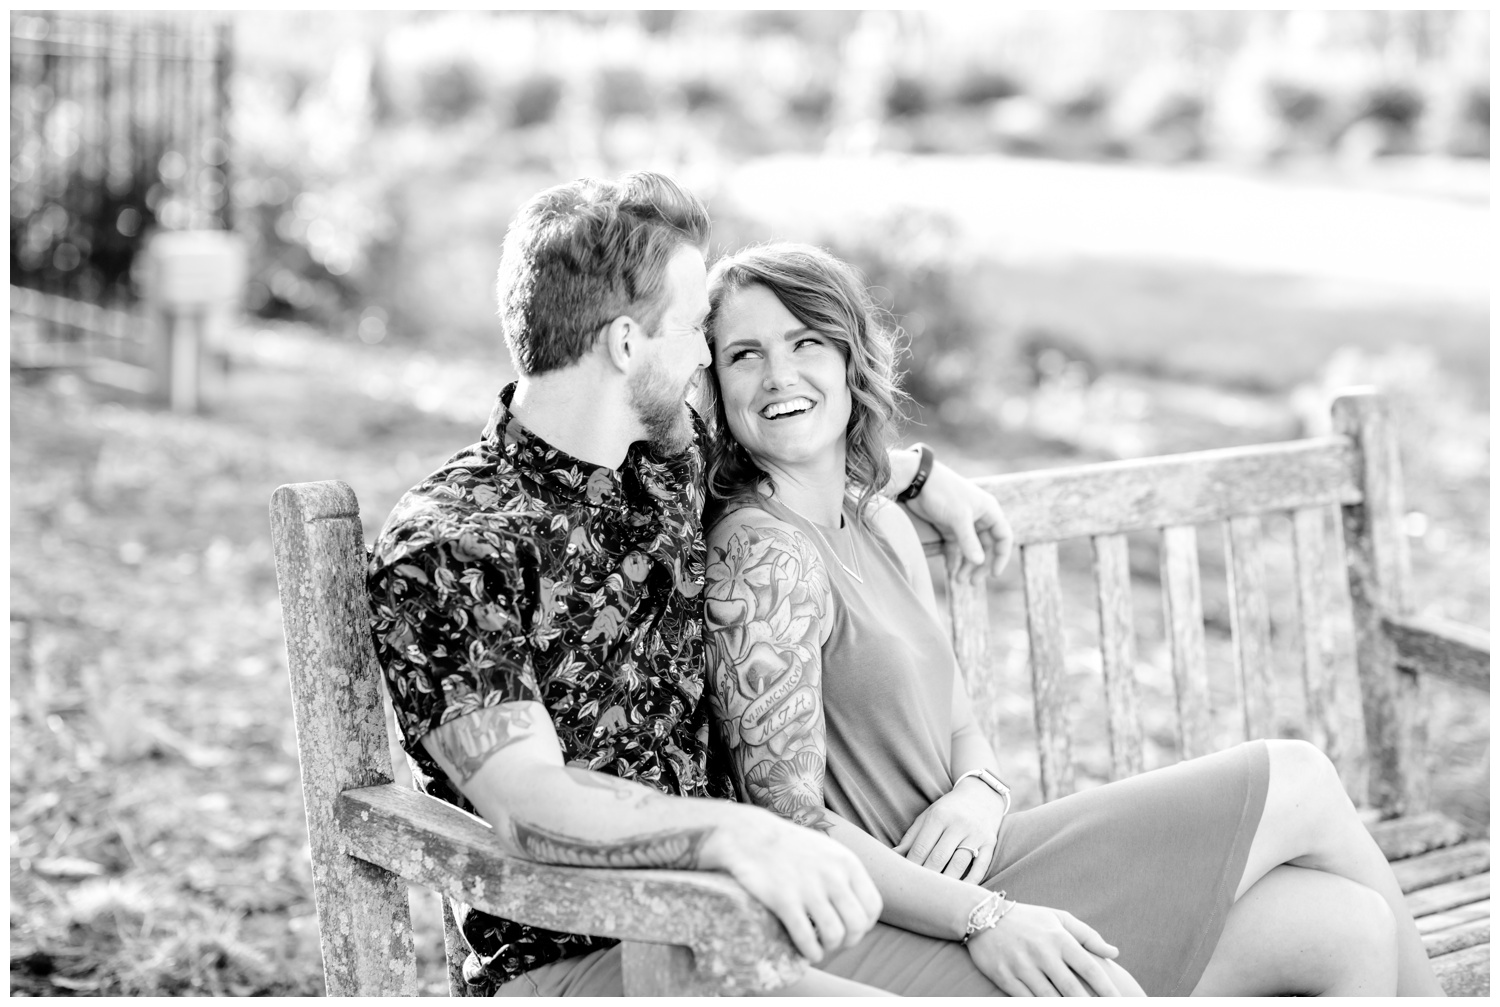 Black and White Engagement Pictures at Ault Park - Snuggling on Park Bench